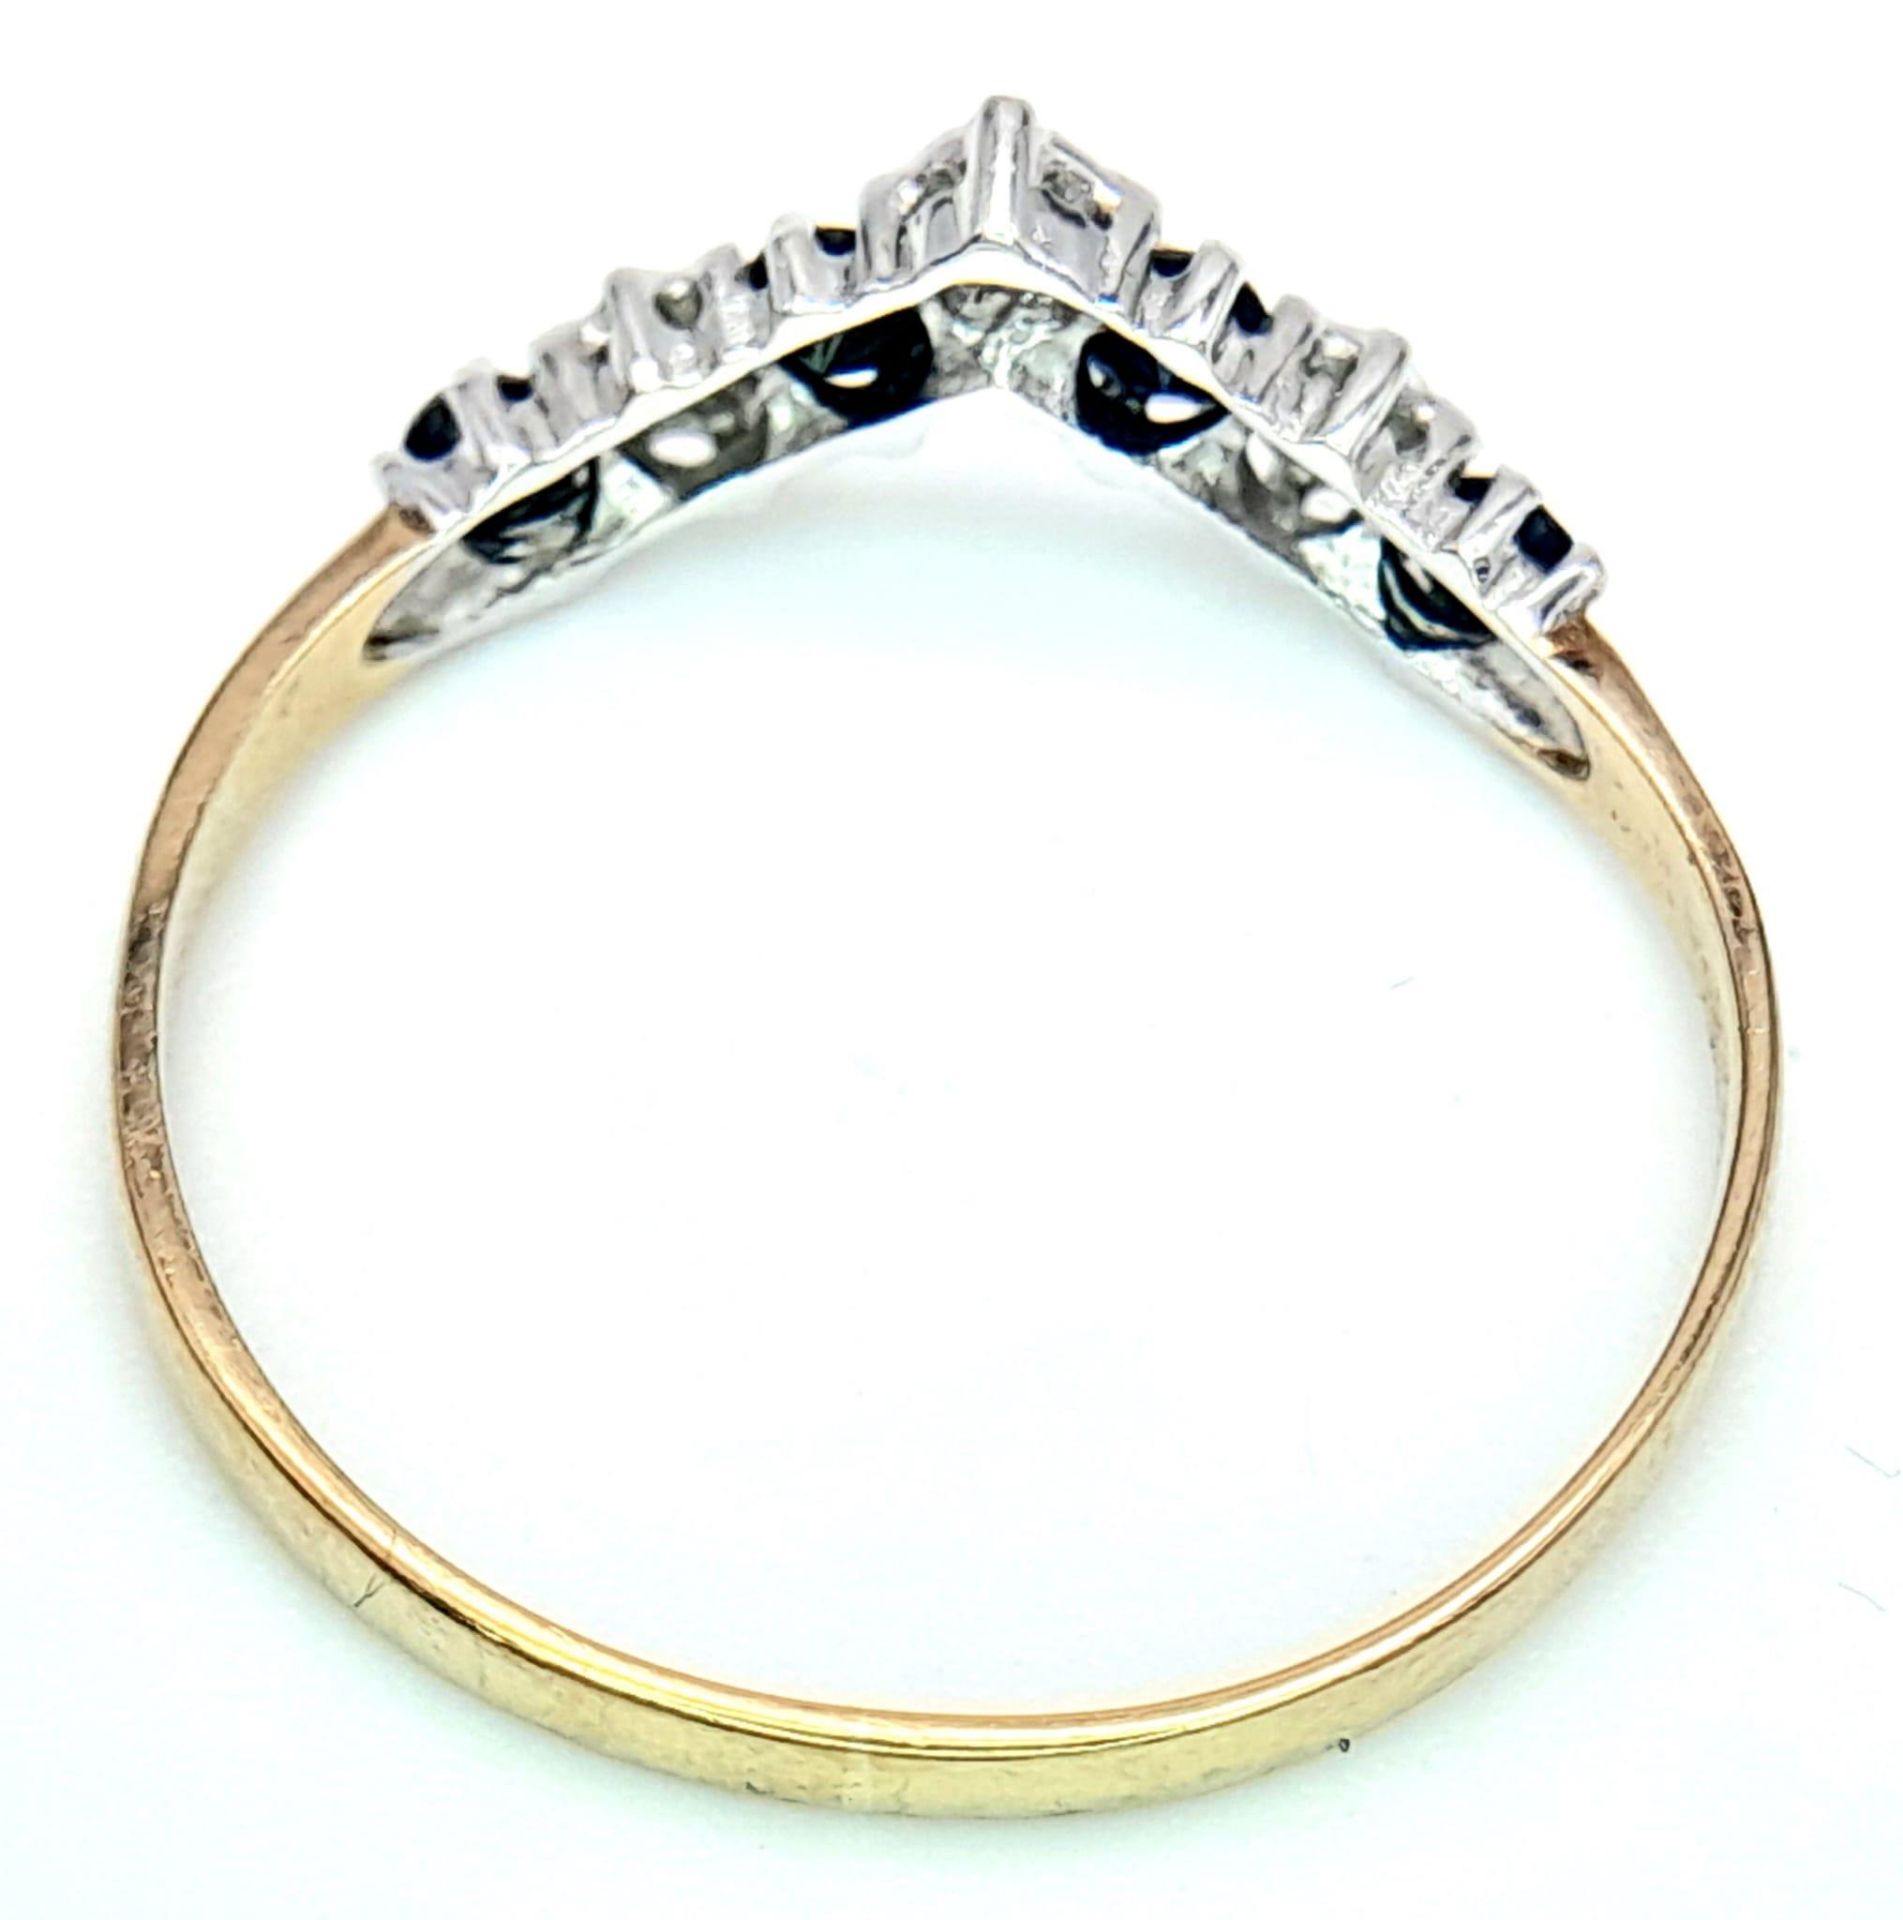 A Vintage 9K Yellow Gold Sapphire and Diamond Chevron Ring. Size N. 1g total weight. - Image 7 of 9